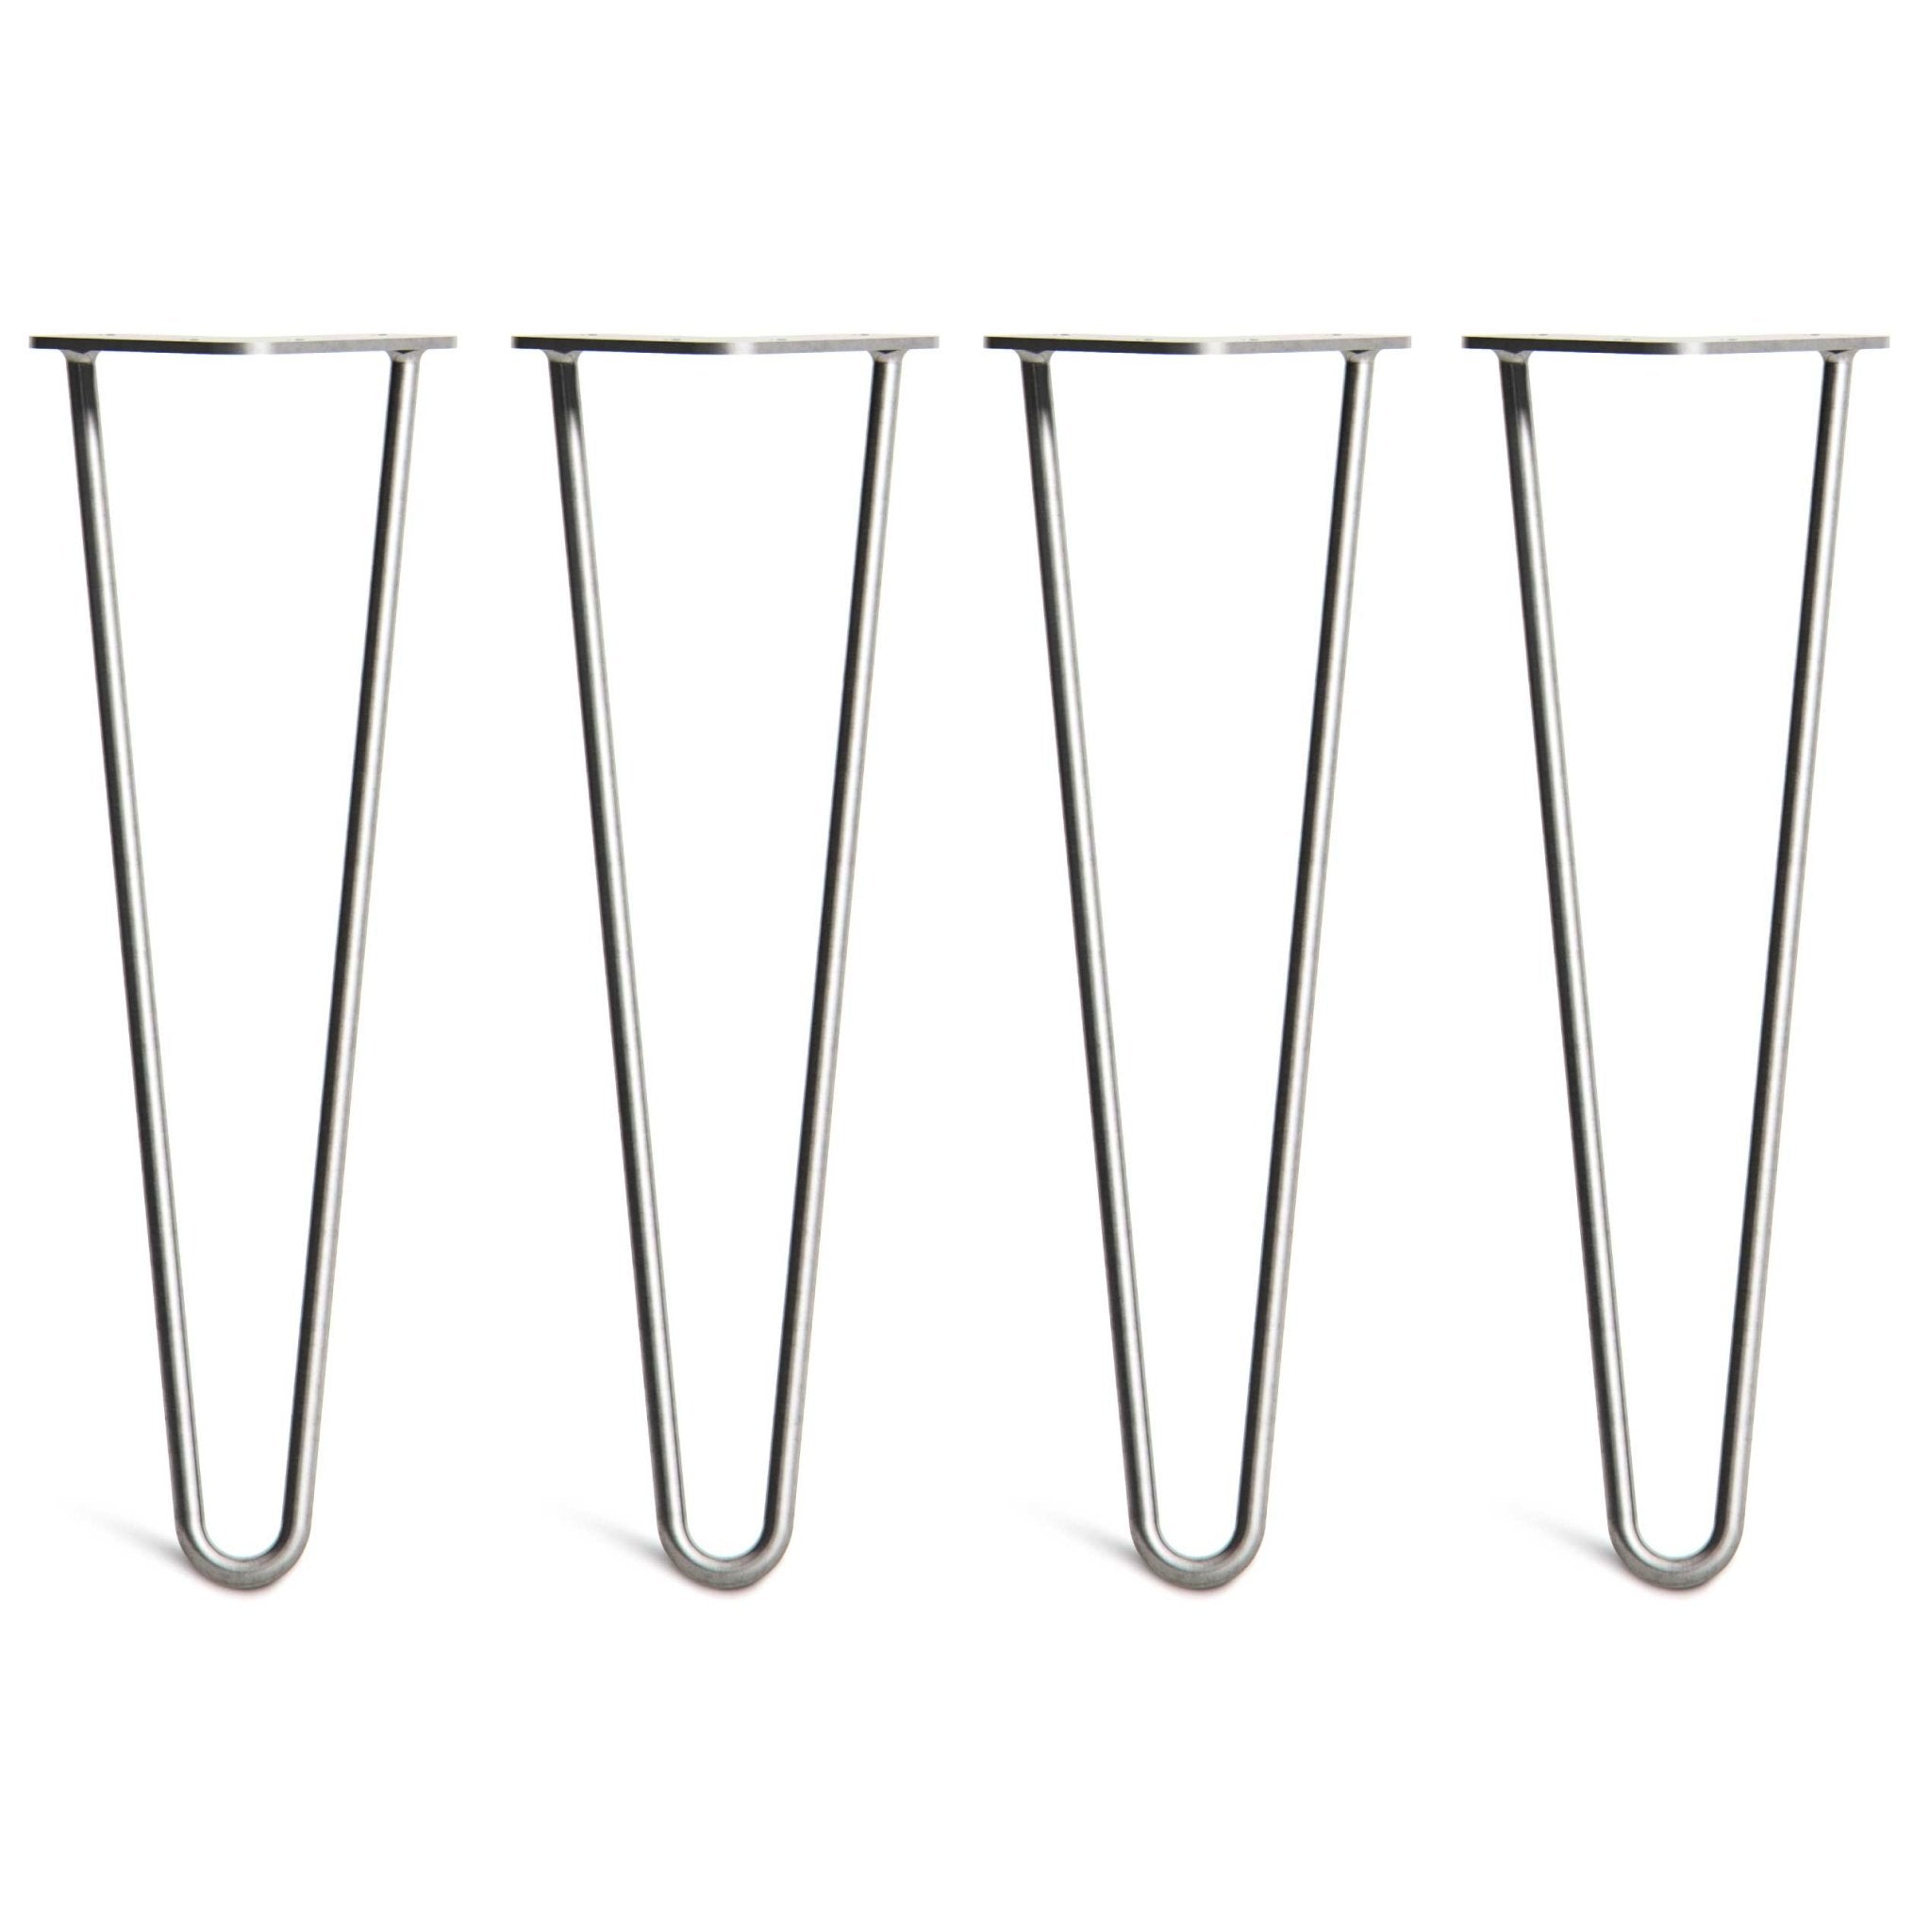 40cm Hairpin Legs - Bench-2 Rod-Stainless Steel-The Hairpin Leg Co.